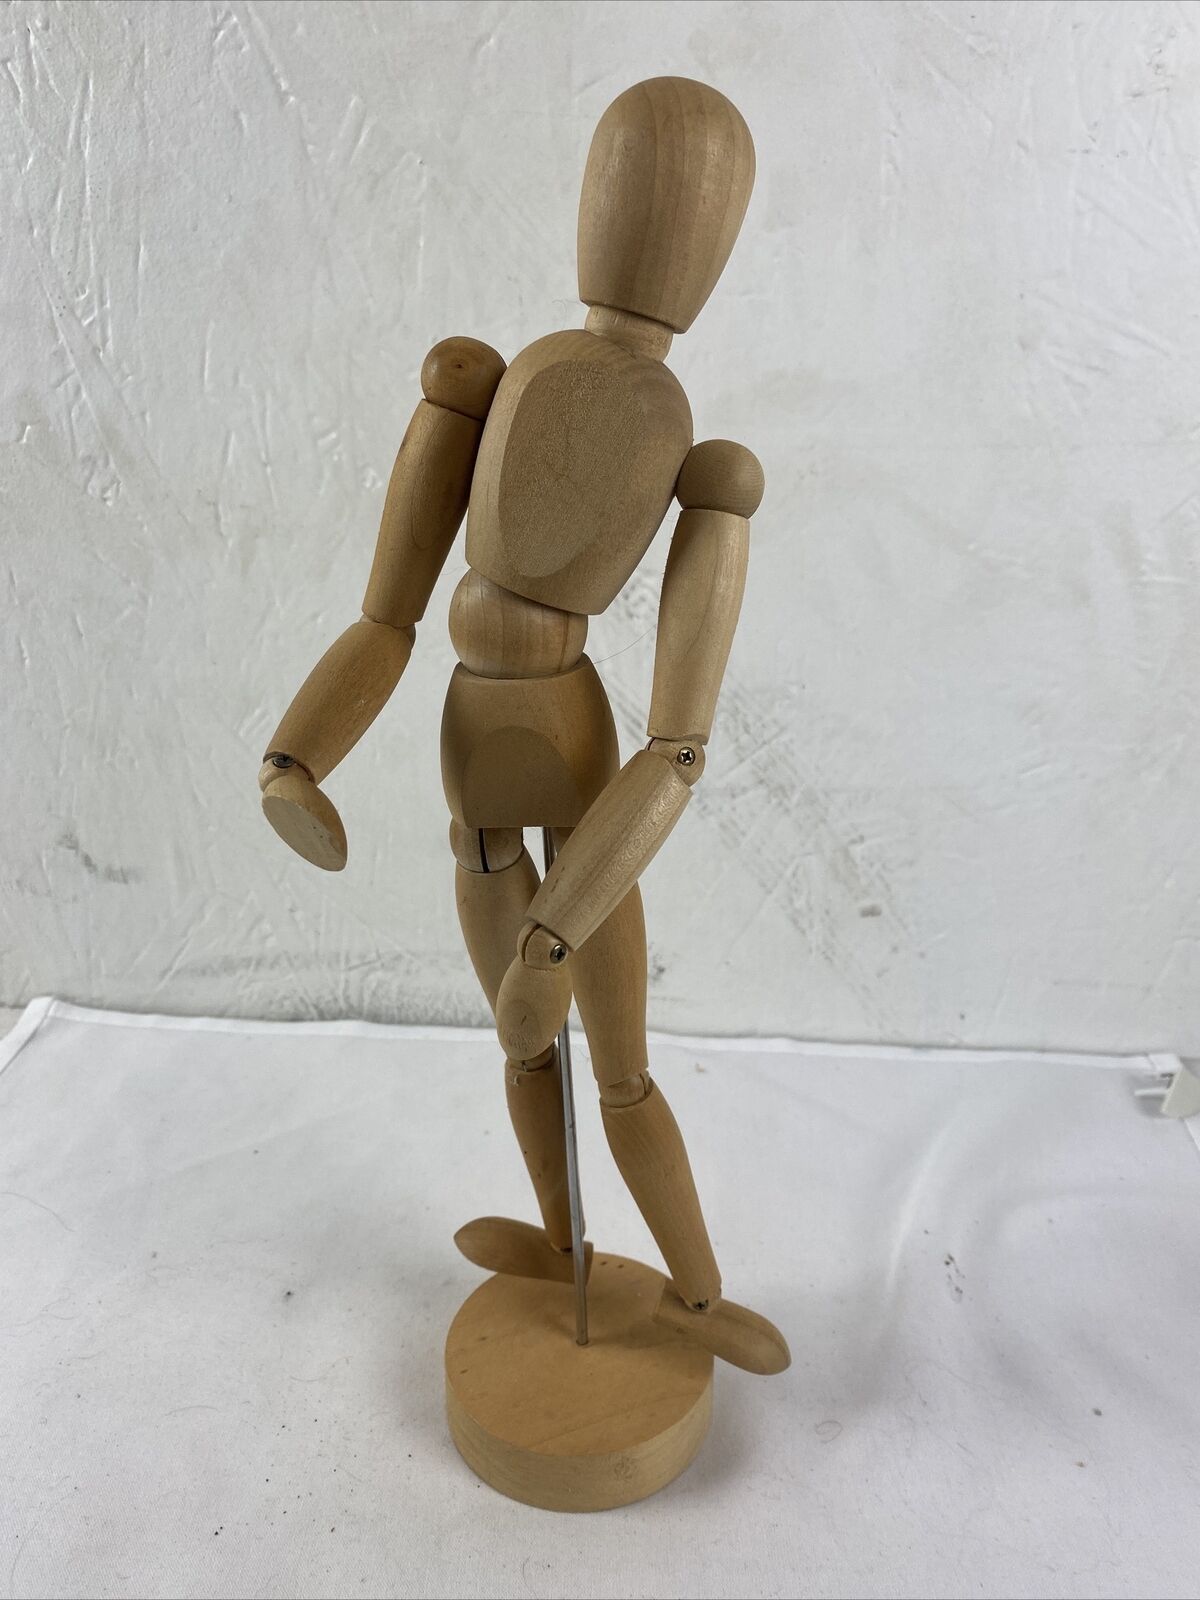 Vintage Articulated Wooden Model Mannequin 13” Tall Artist Poseable Sculpture